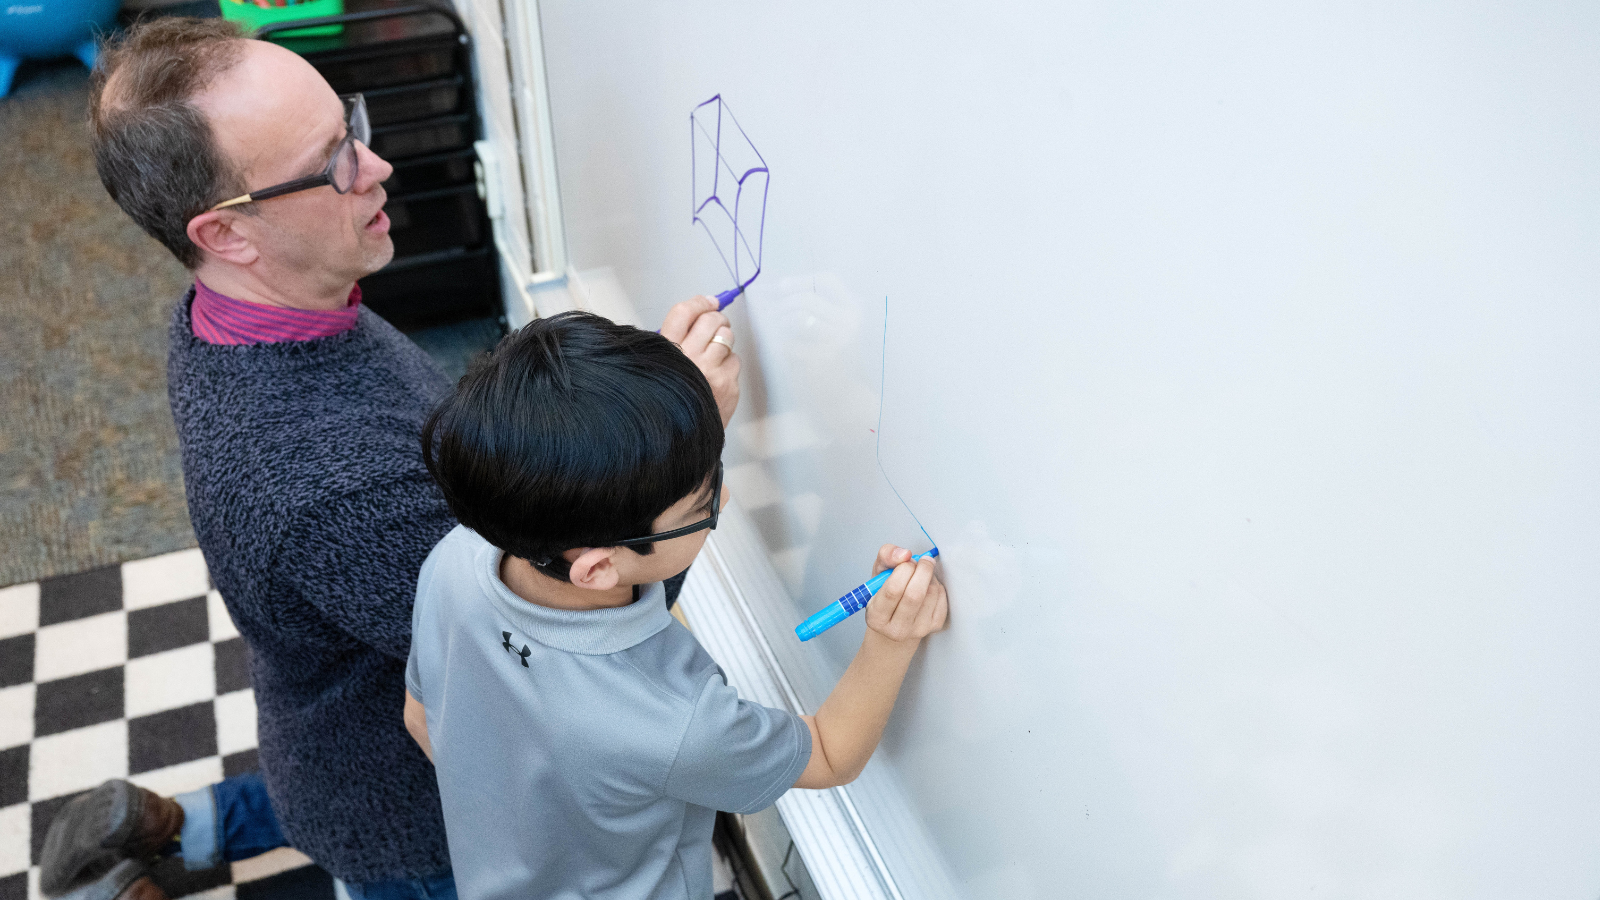 Teacher and student at whiteboard